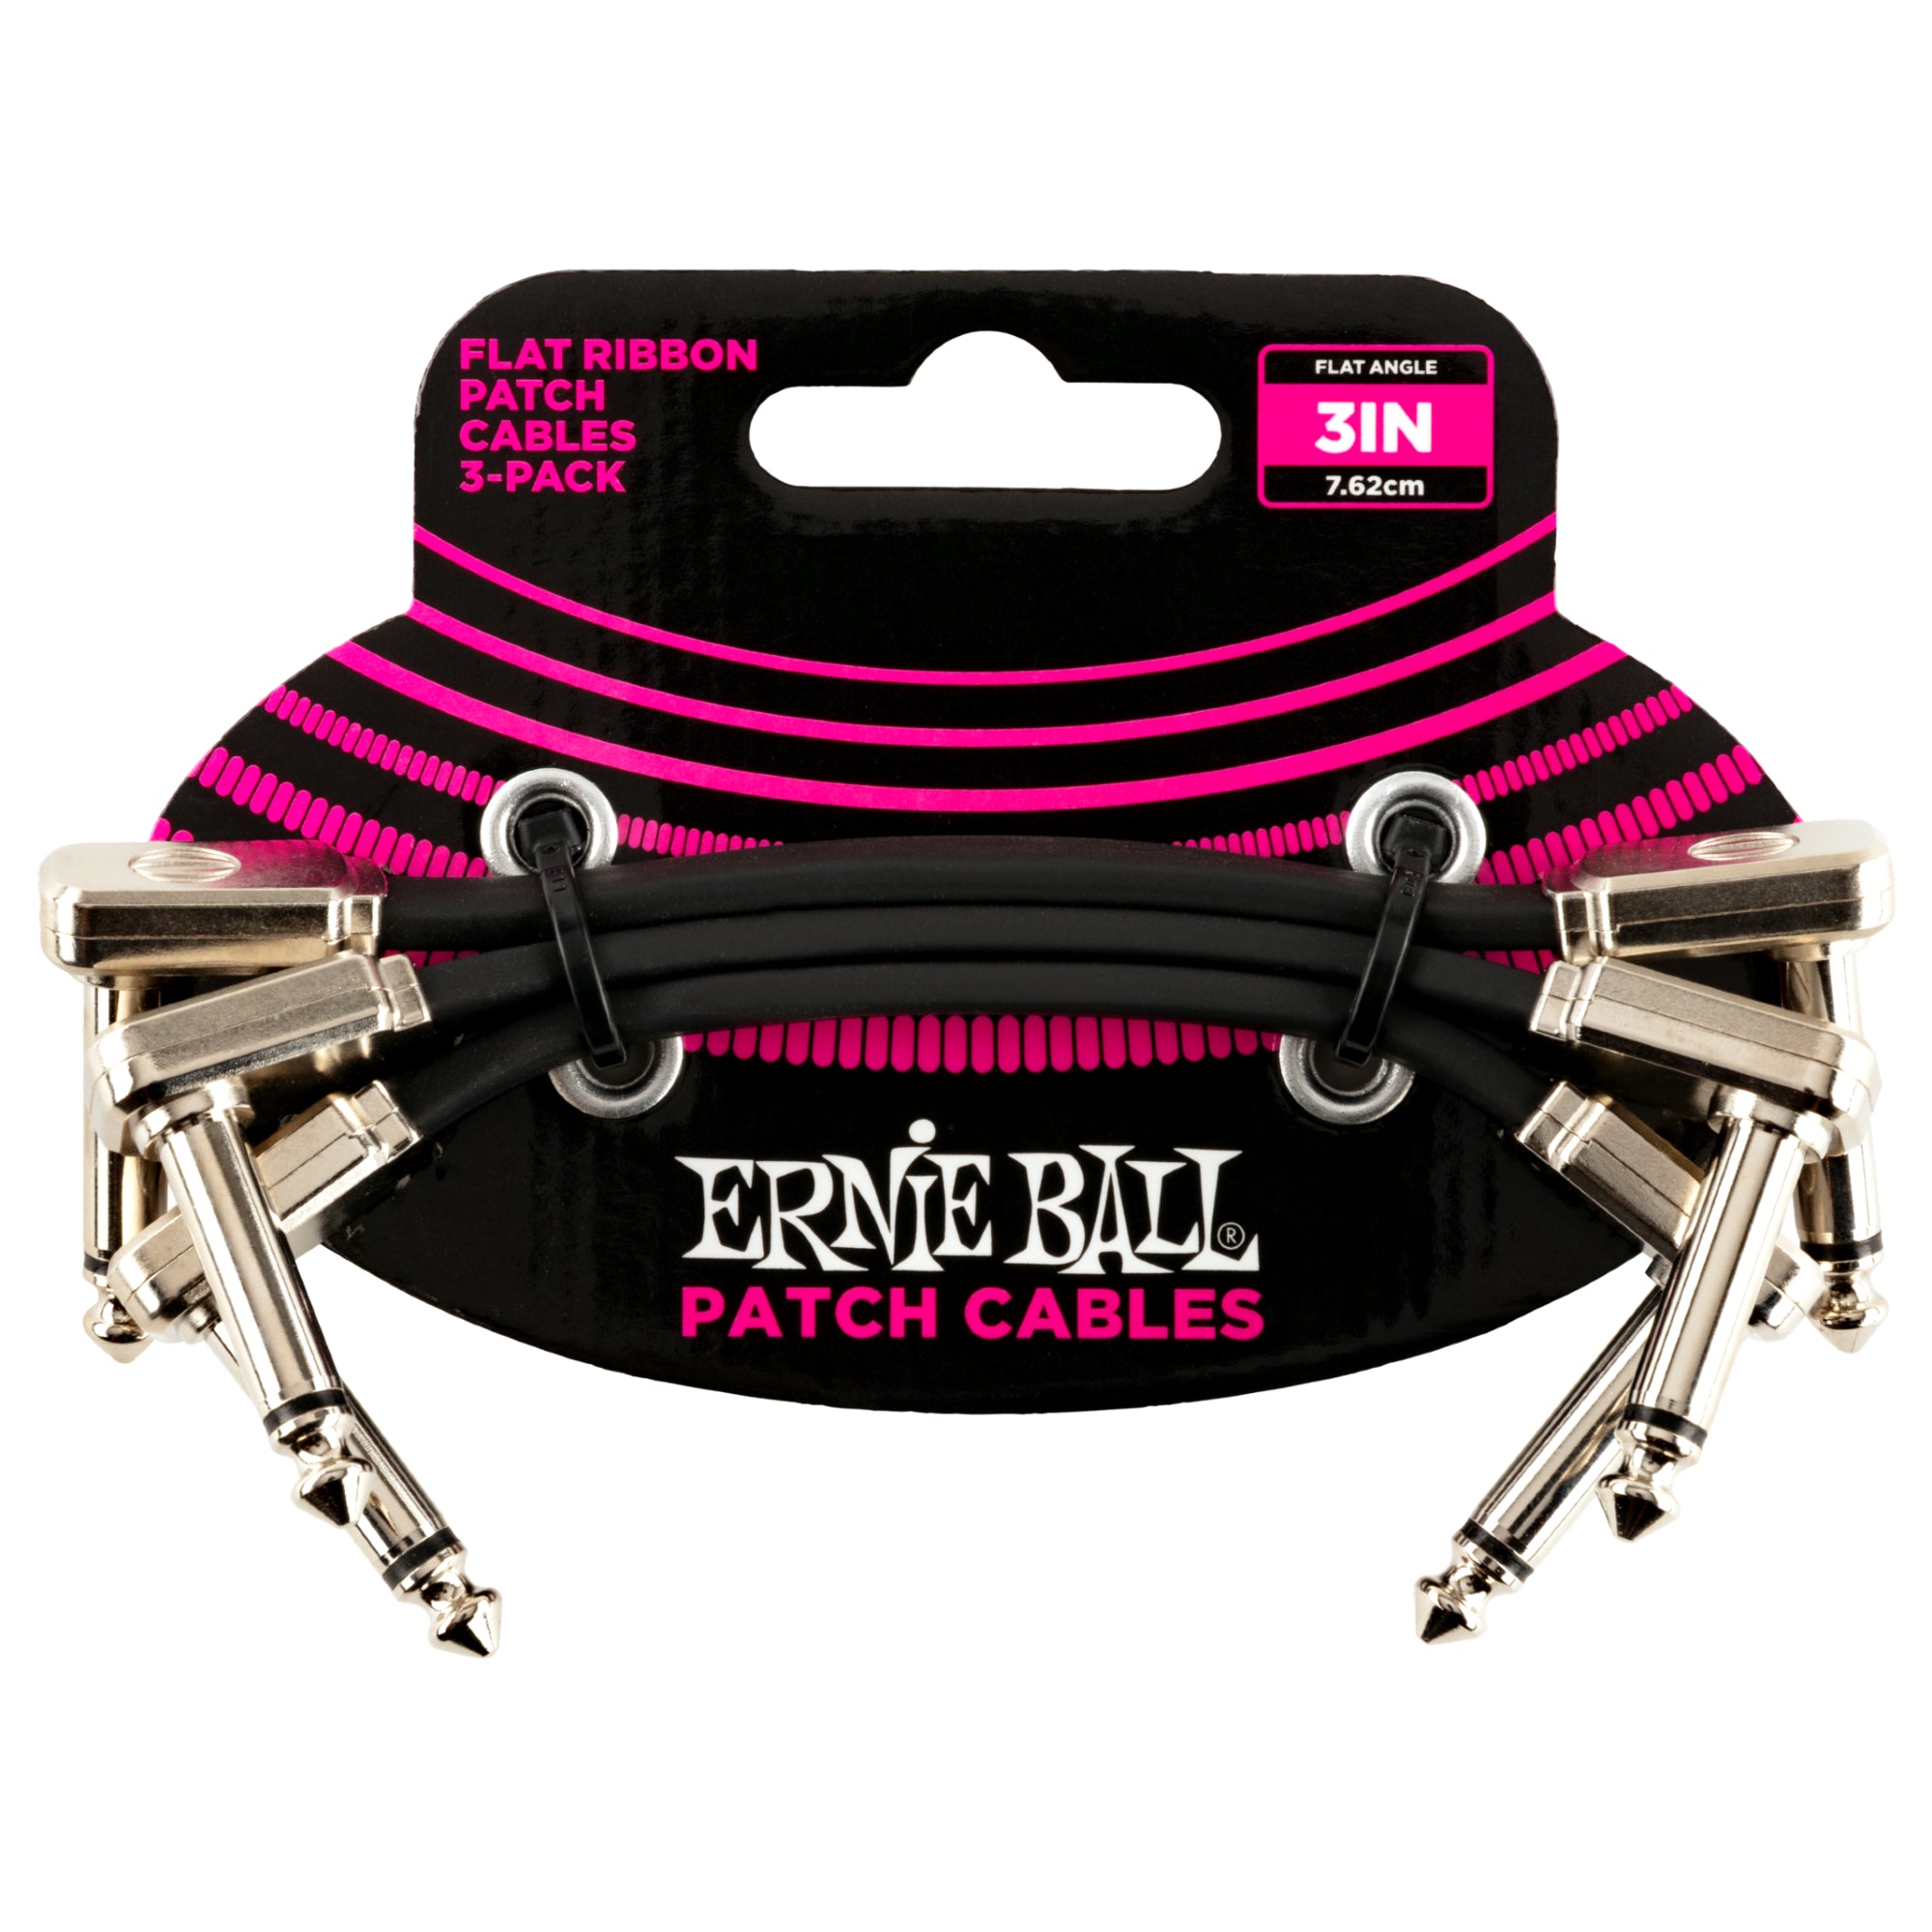 Ernie Ball 6220 3" Flat Ribbon Patch Cable 3-Pack P06220